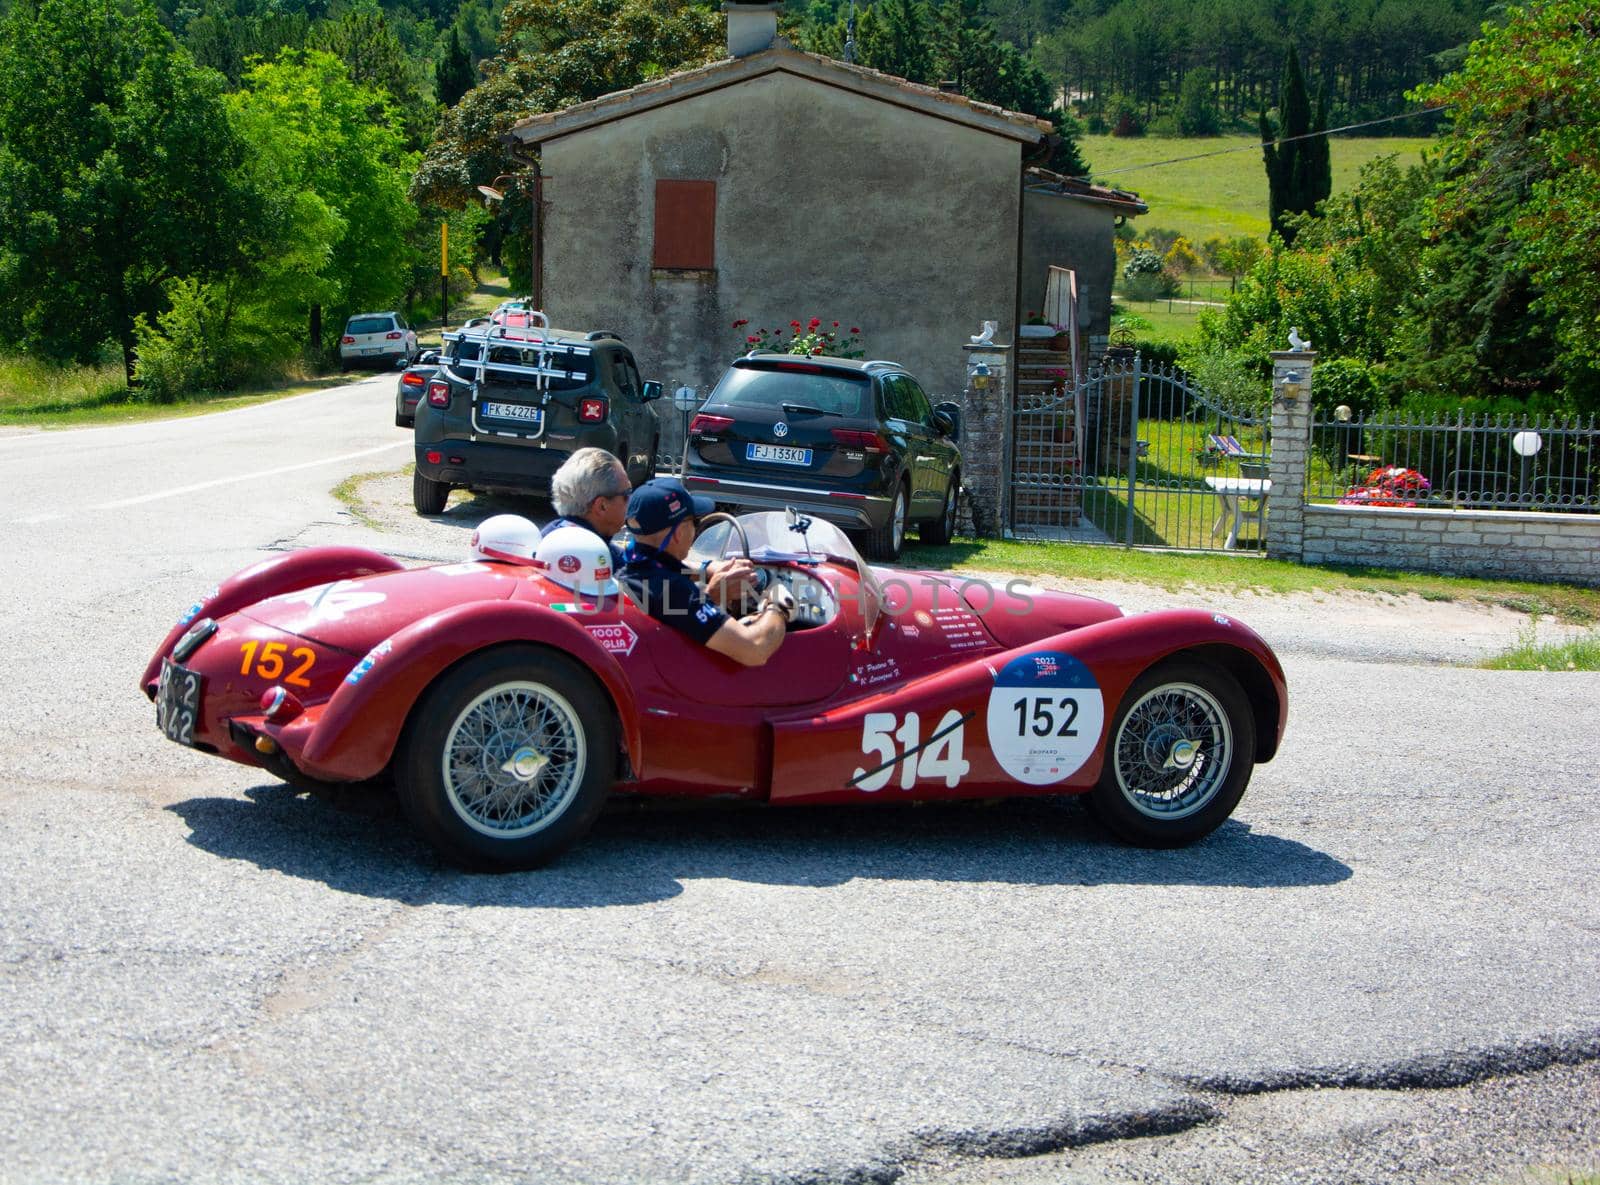 STANGUELLINI 1100 SPORT 1948 on an old racing car in rally Mille Miglia 2022 the famous italian historical race (1927-1957 by massimocampanari